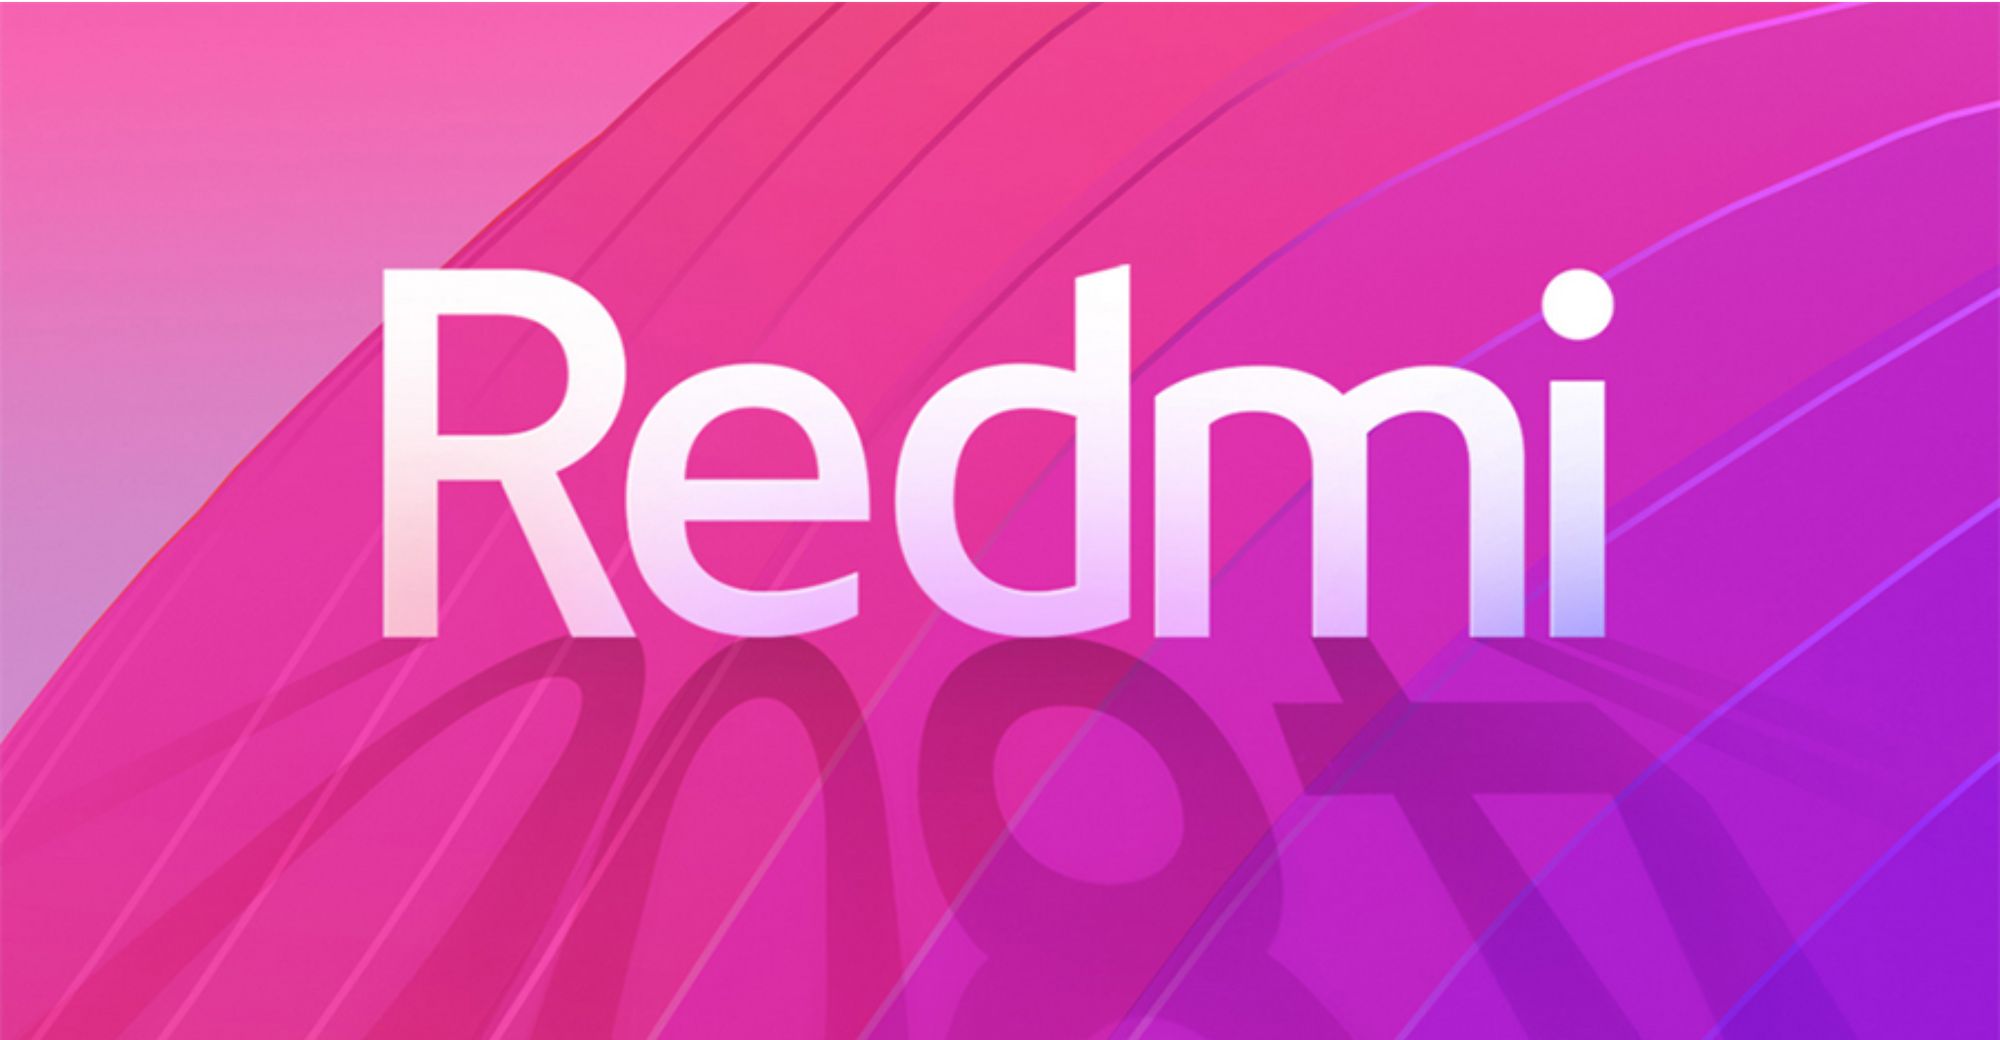 Redmi GM: No Plans for Redmi Cars yet, Focus on Making Xiaomi Cars First